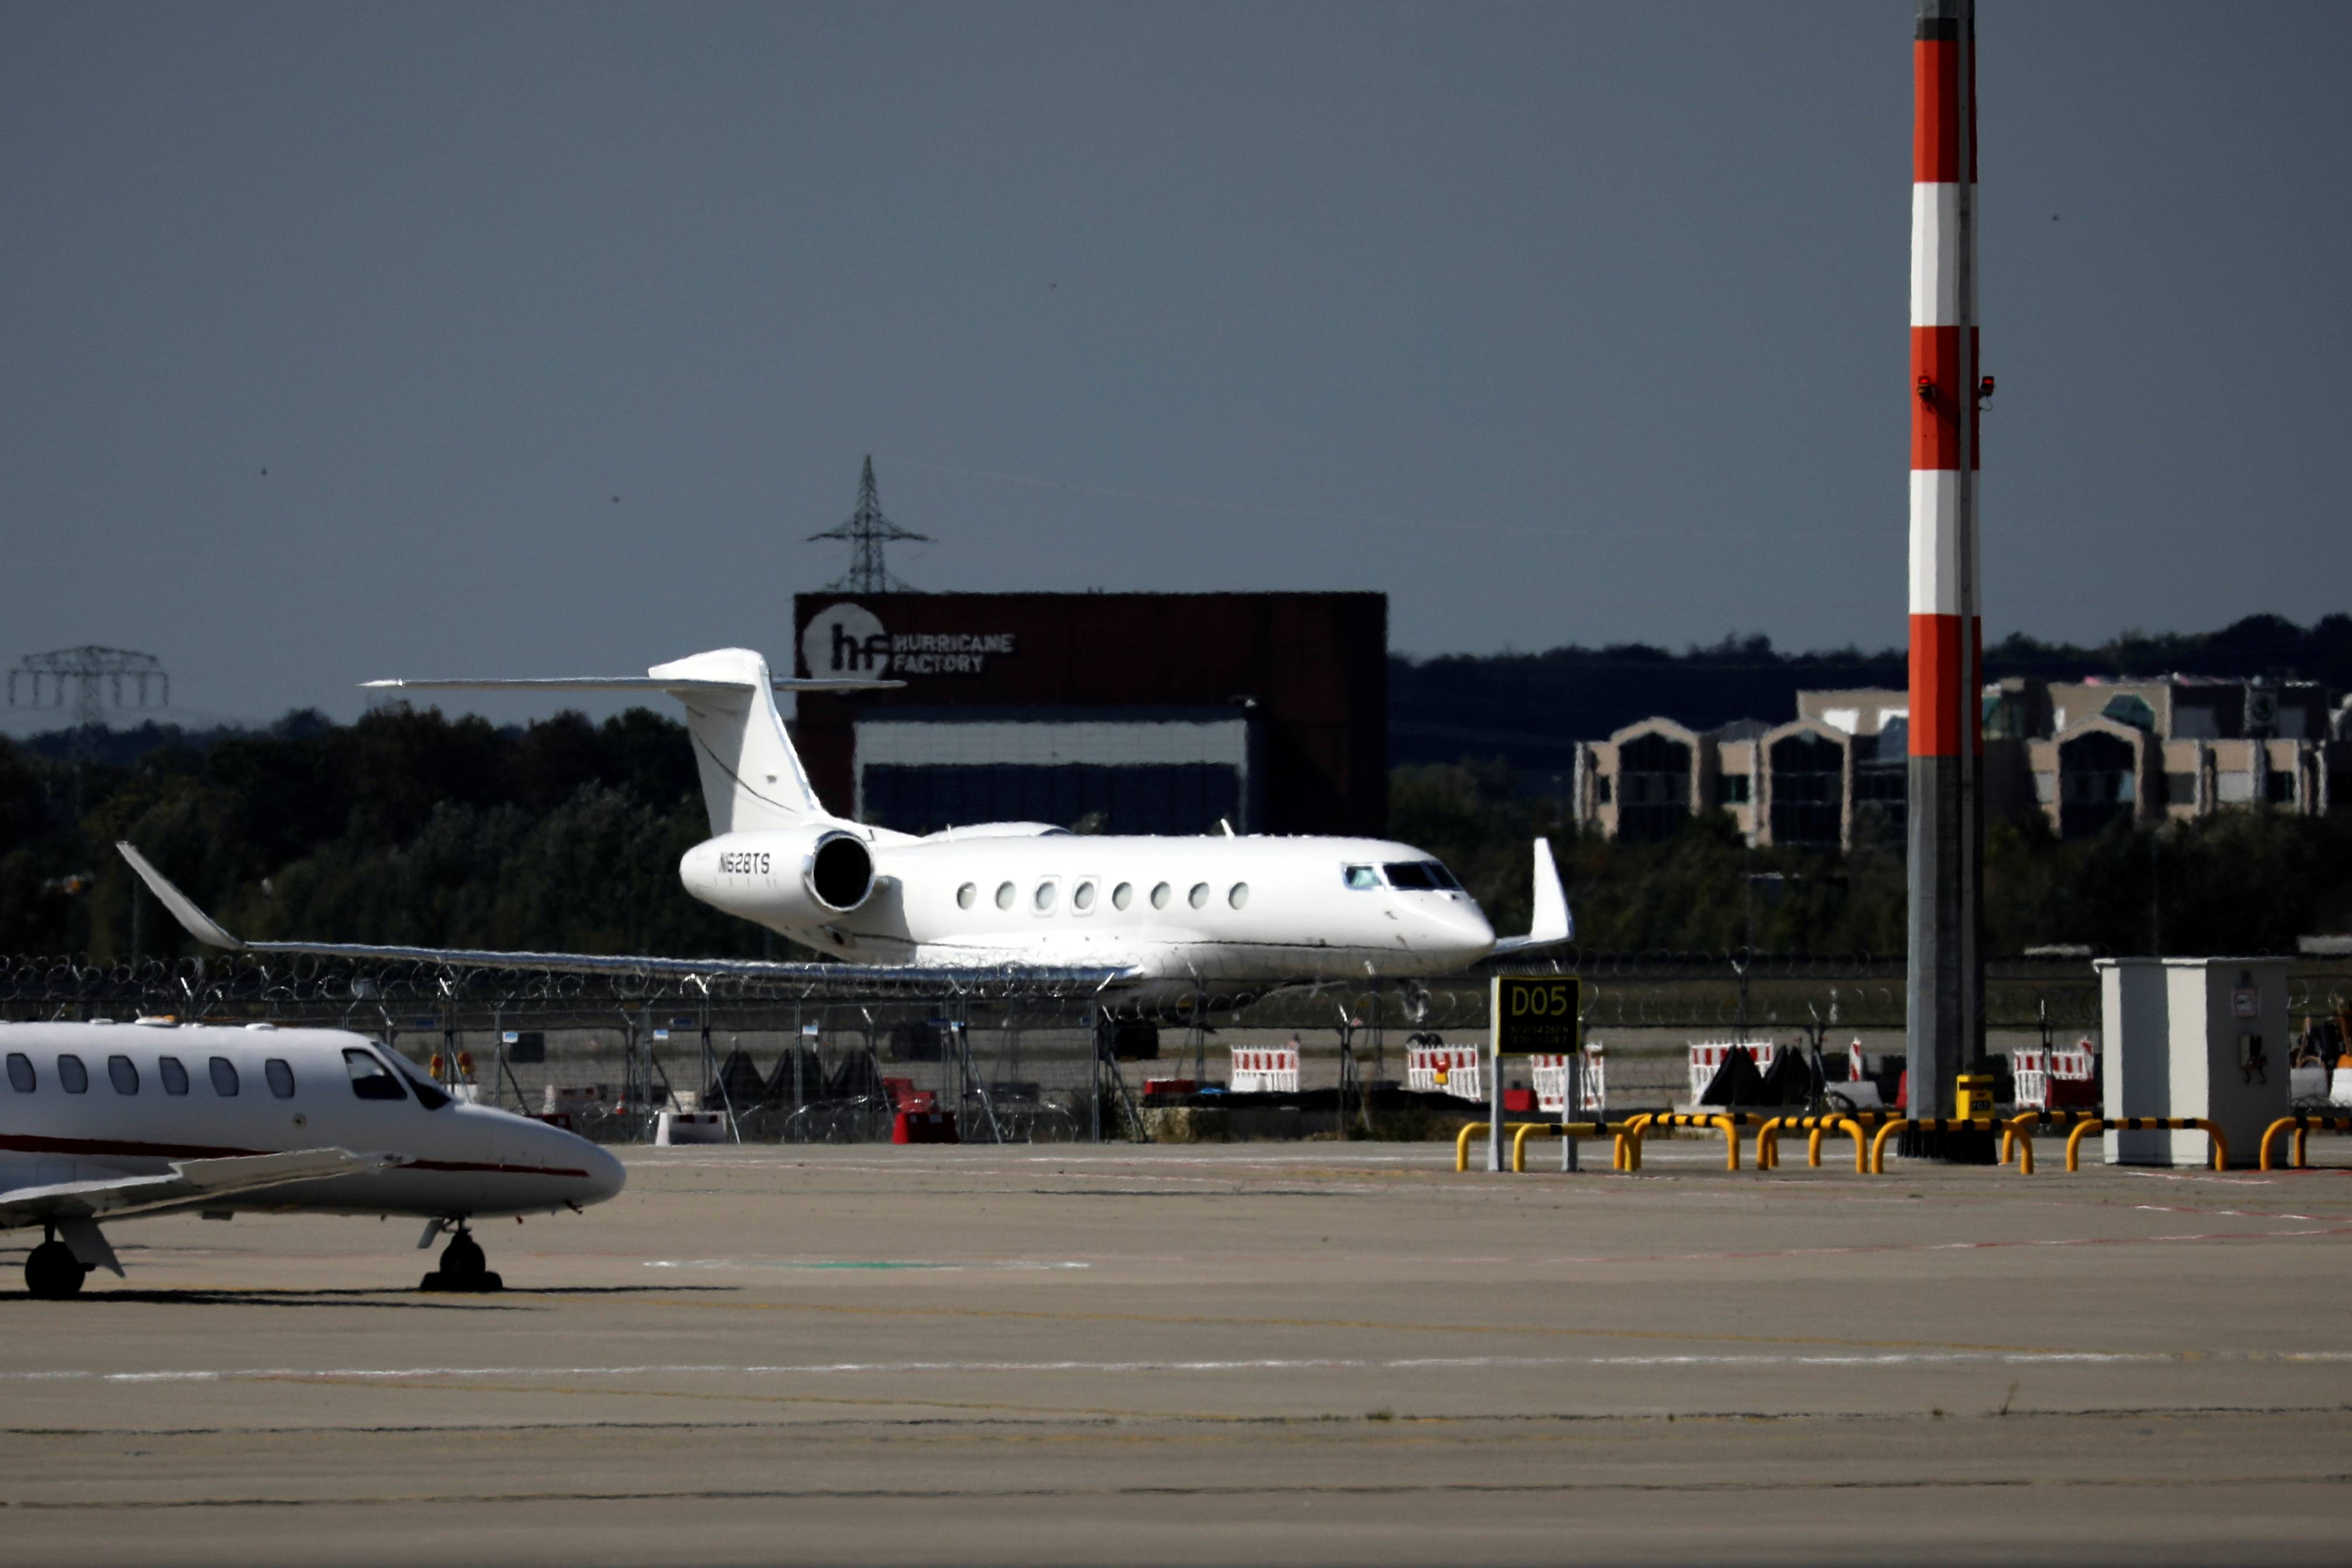 In this photo you can see one of the Gulfstream brand aircraft owned by Elon Musk, seen at the Willy Brandt airport in Berlin.  (REUTERS/Hannibal Hanschke)